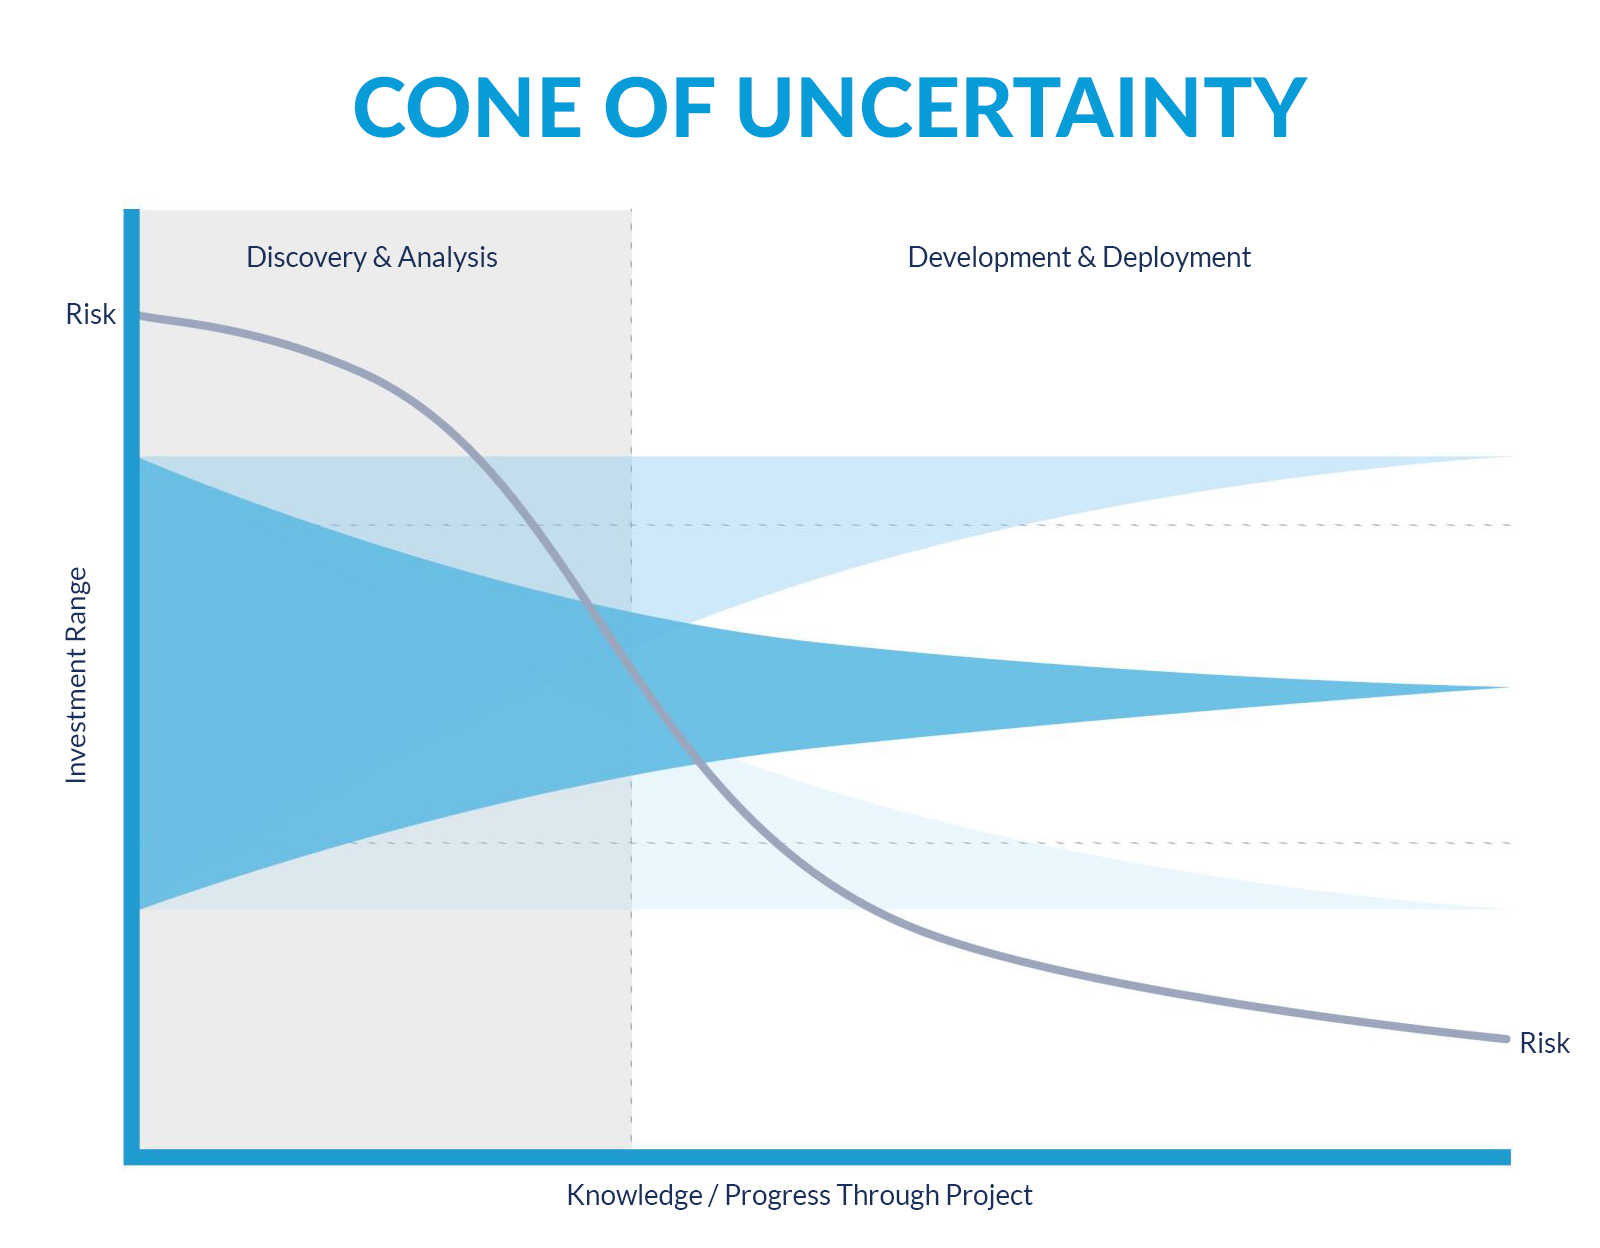 Cone of Uncertainty Graphic